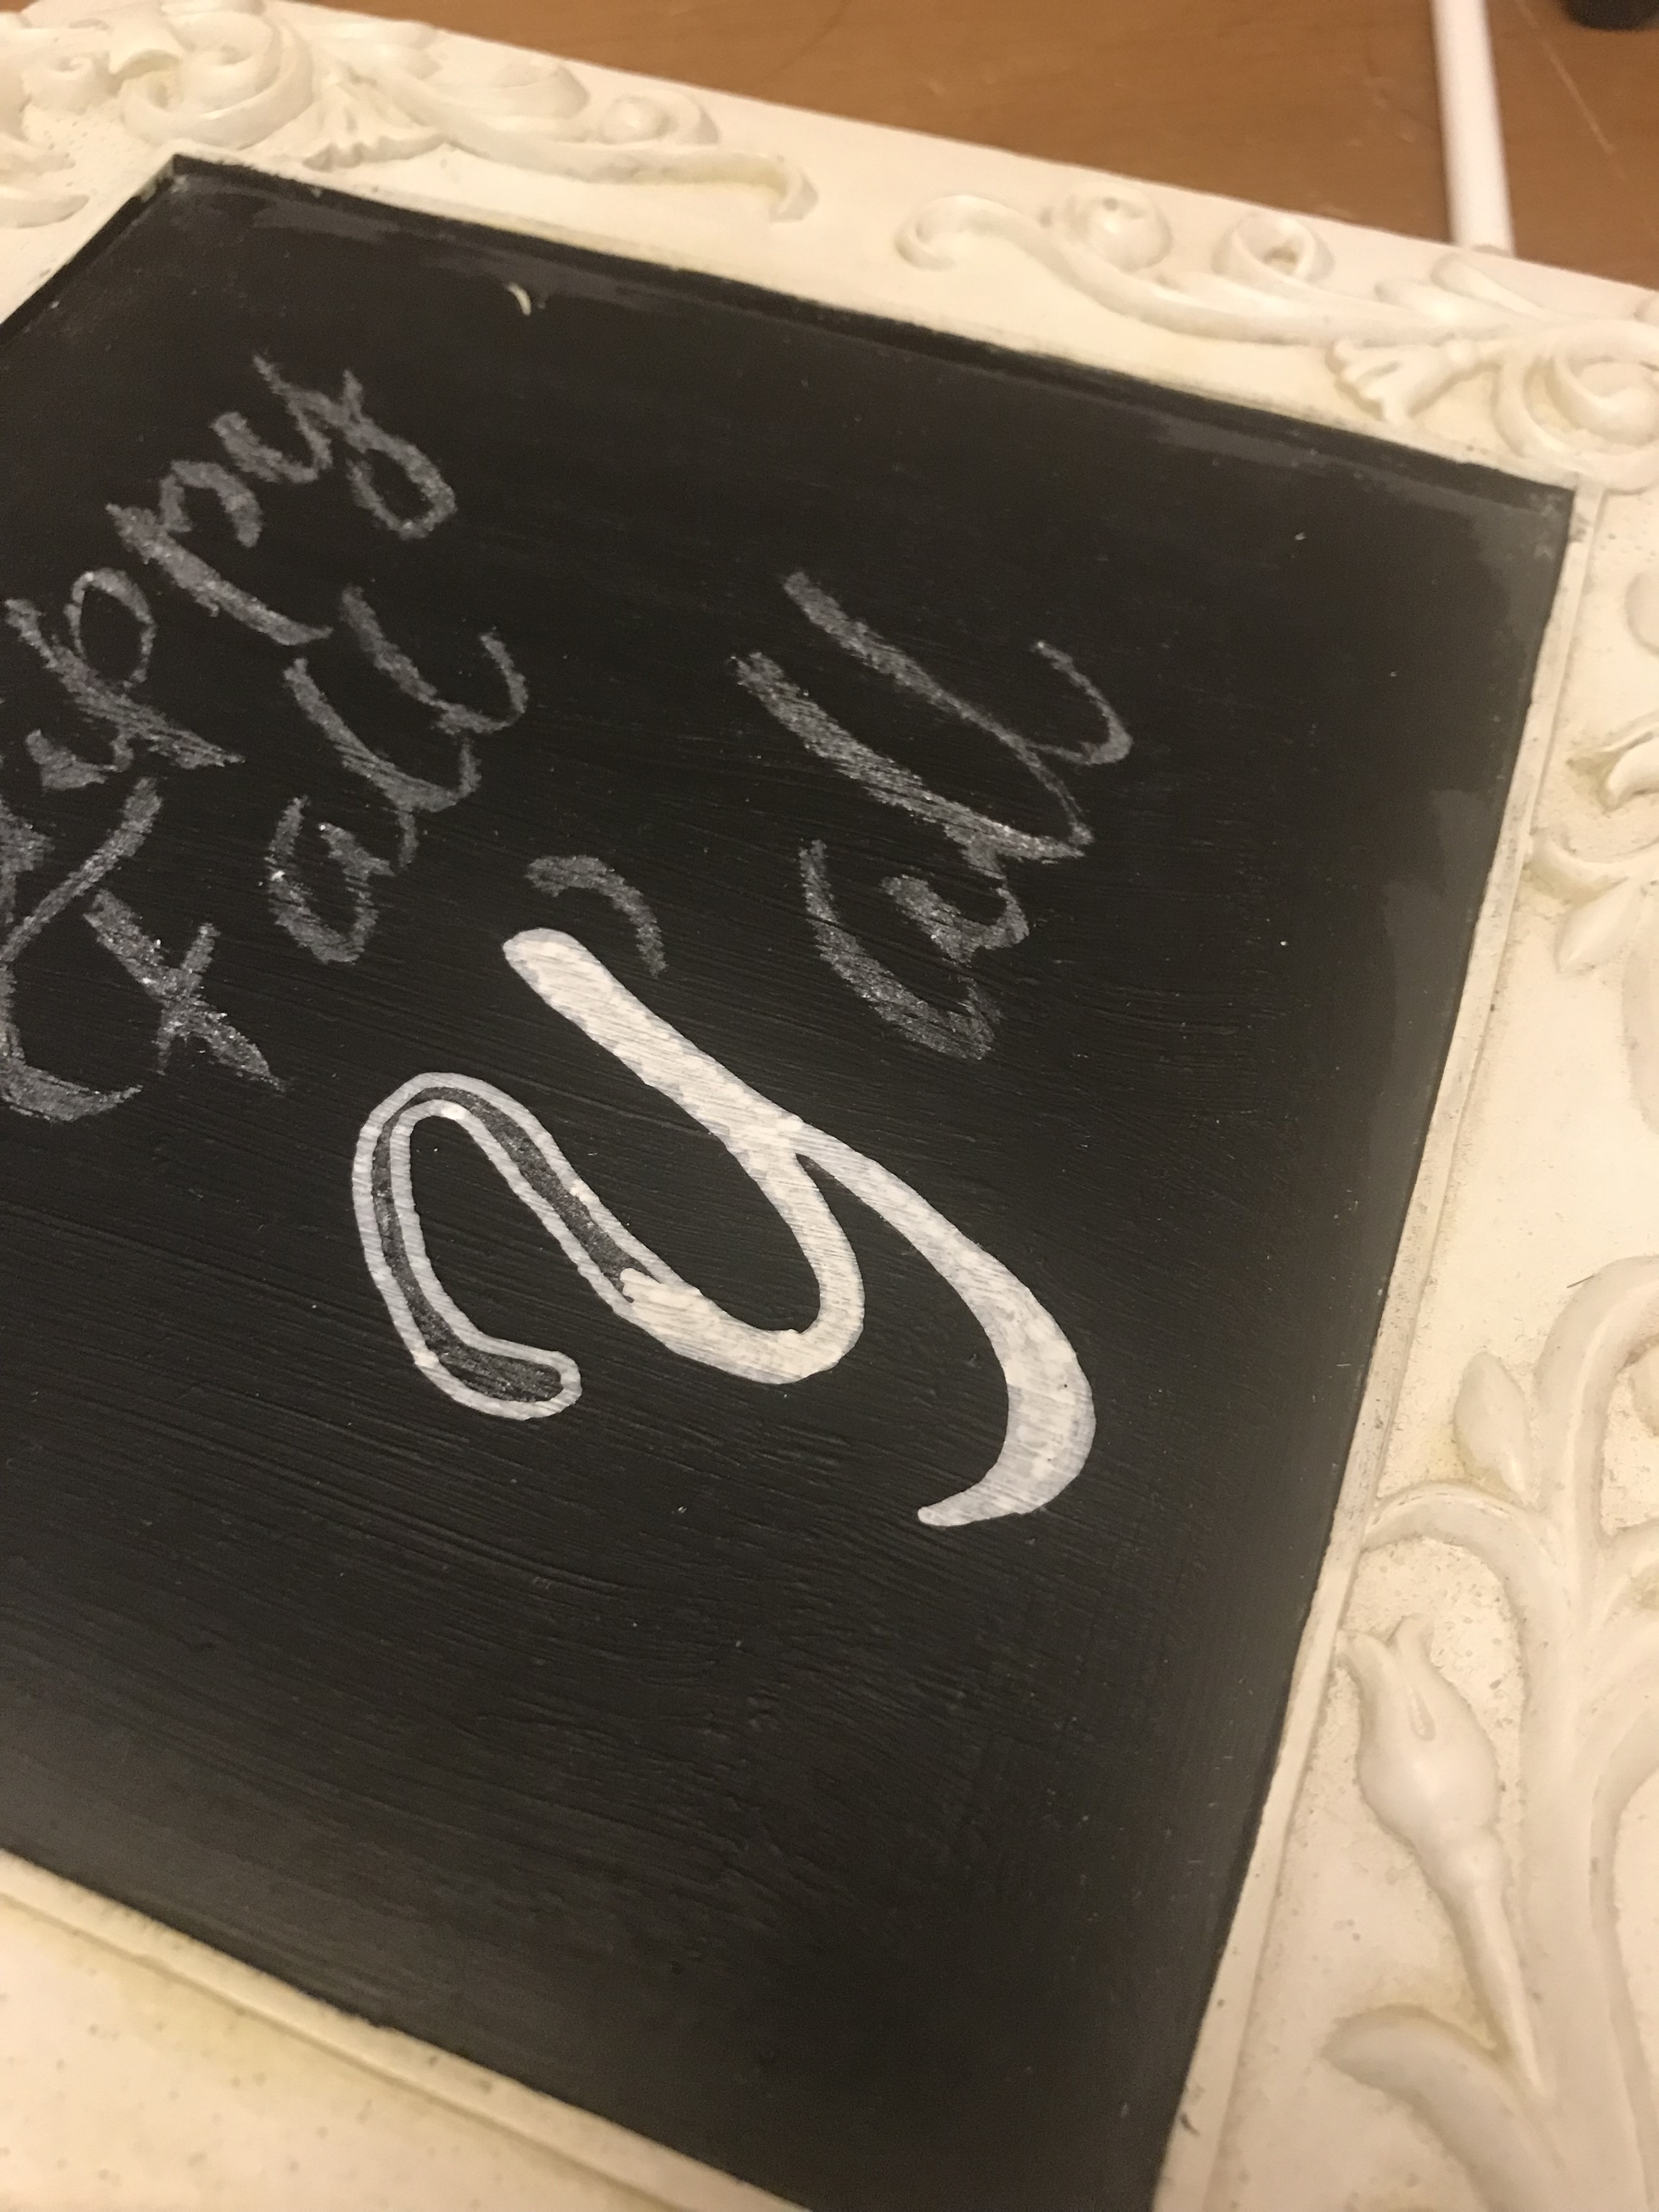 An extremely easy chalkboard lettering hack perfect for DIY, crafts, holiday projects, and weddings